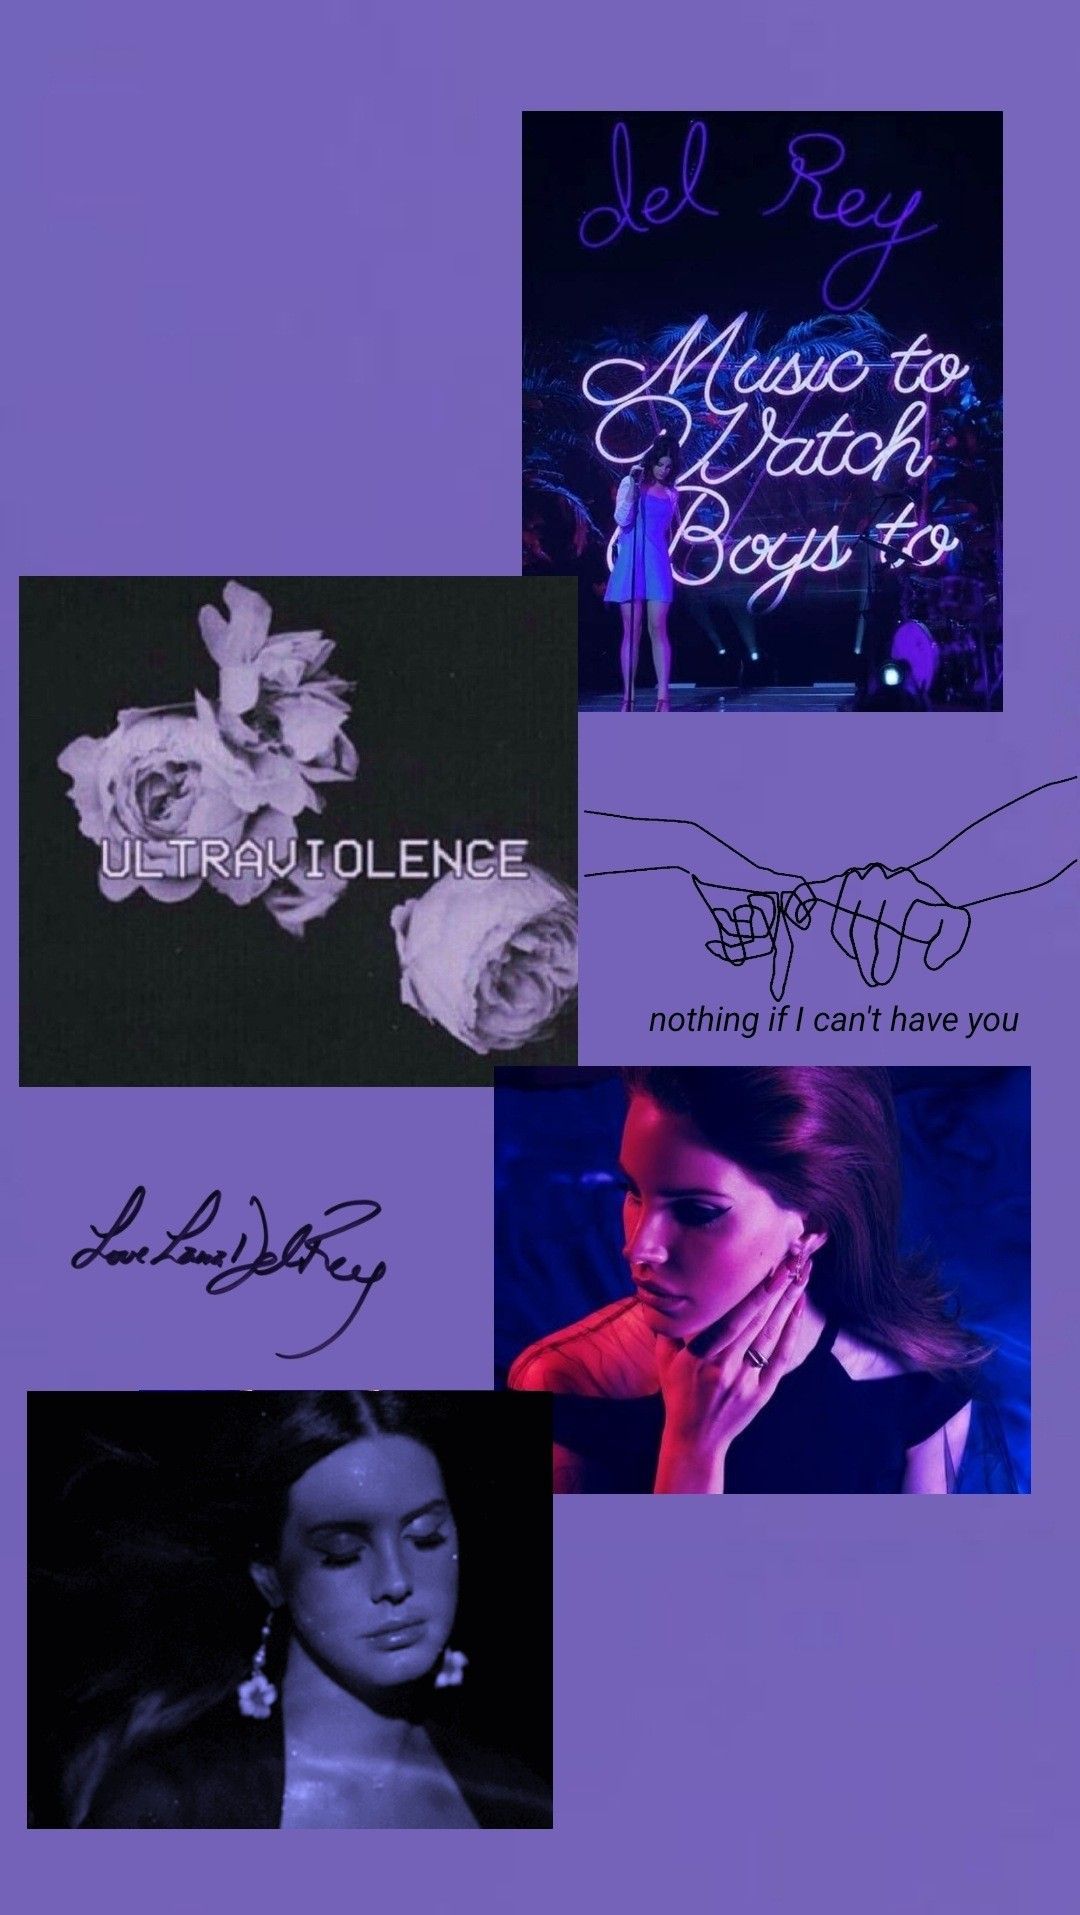 Aesthetic wallpaper for phone with purple background and pictures of Del Rey, flowers, and the words 